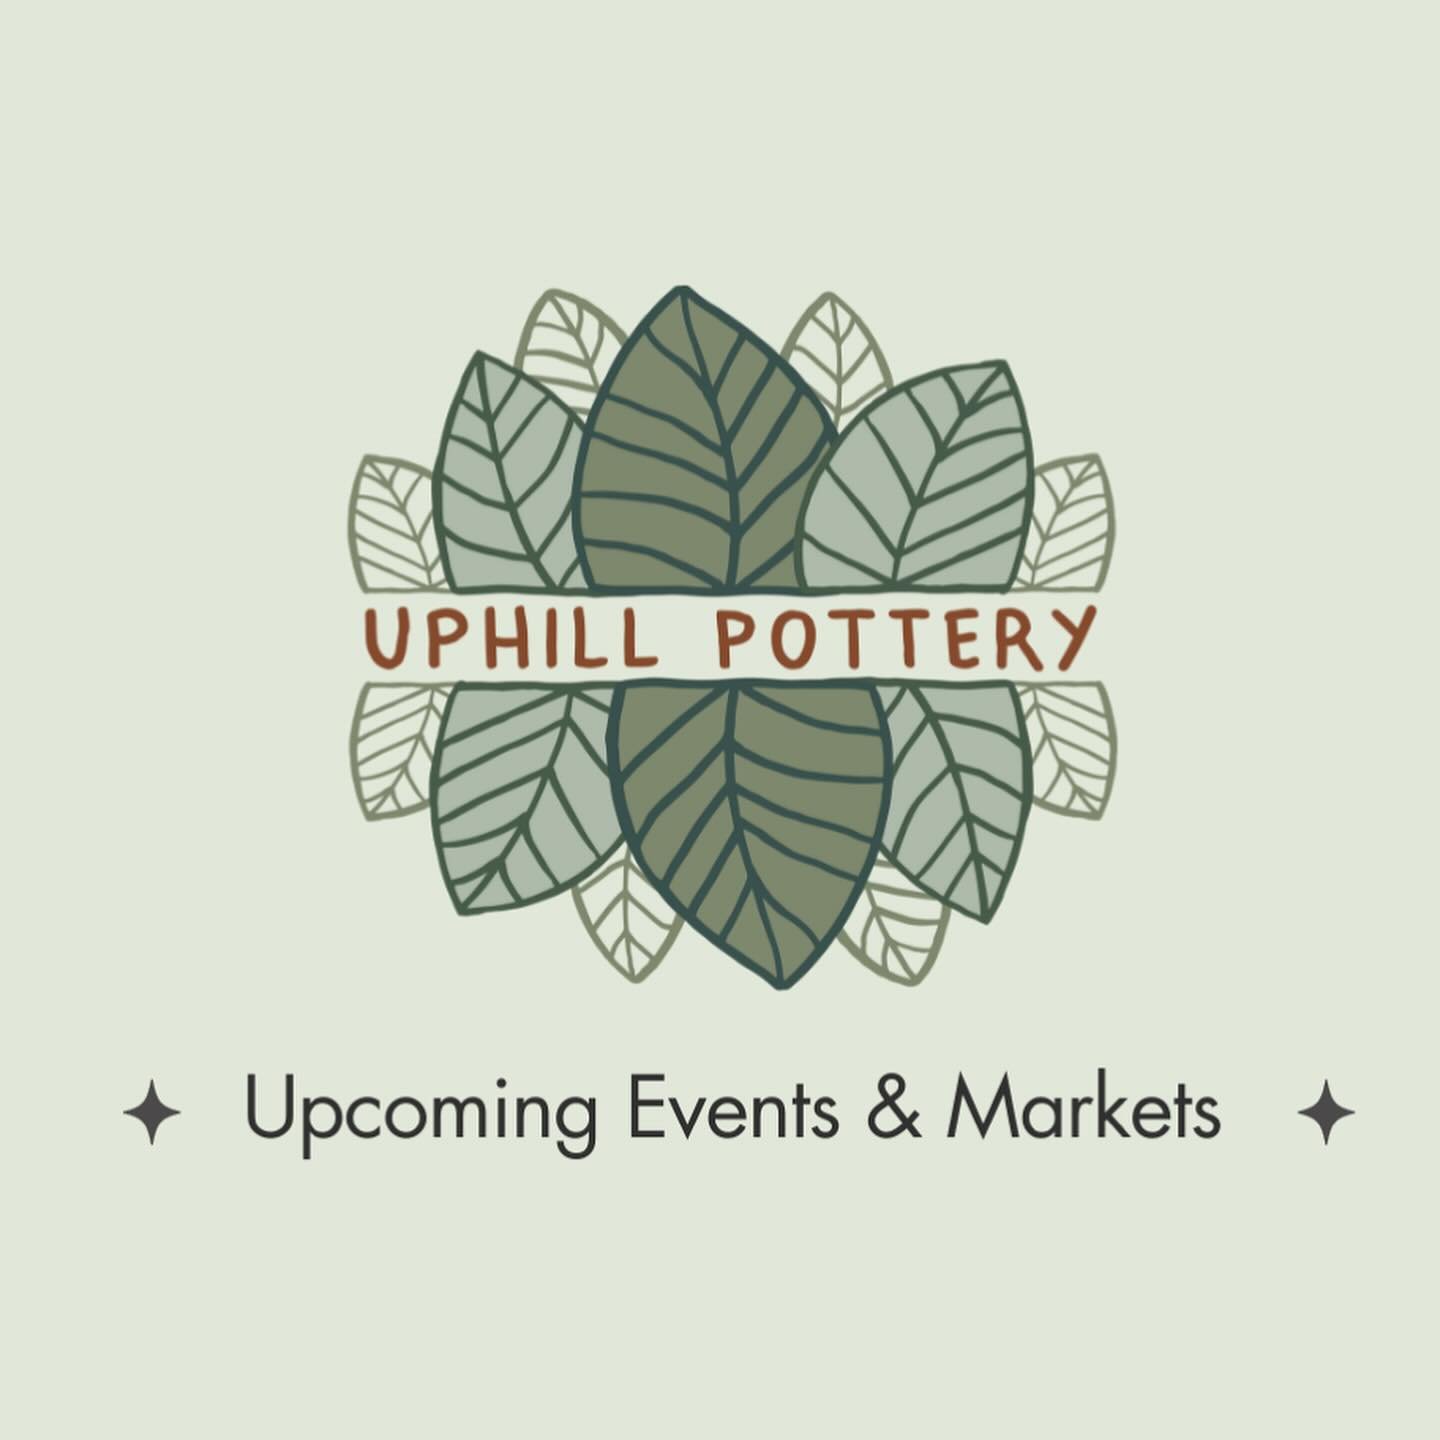 🚨 where to find #uphillpottery at events and markets this spring 🚨 
.
🌱 May 4 Mother&rsquo;s Day craft fair @hazenunion school, 9am-3pm
🌱 May 25-26 OPEN STUDIO with @vermontcraftscouncil open studio weekend, 10-5 Saturday &amp; Sunday 
🌱 May 31 